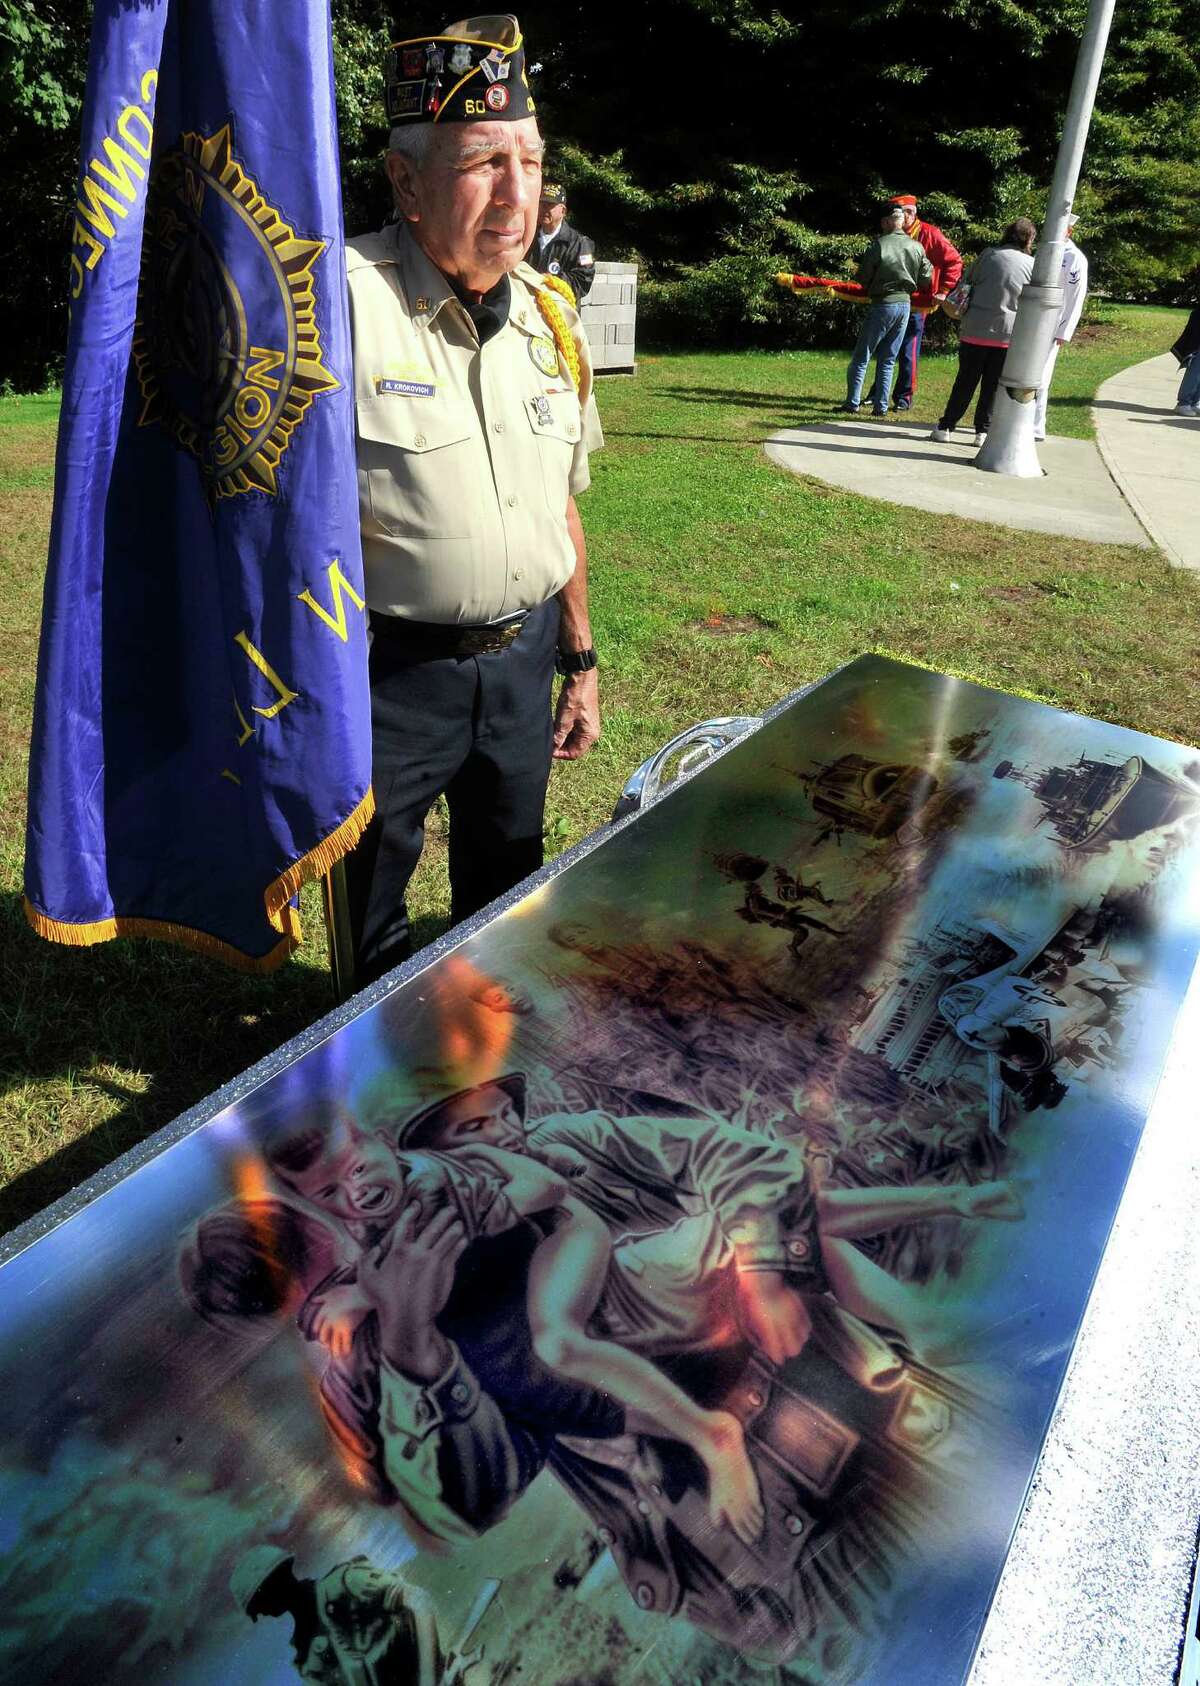 Robert Krokovich Sr. of the American Legion stands above a vault containing memorabilia following a closing ceremony for the Dignity Memorial Vietnam Wall in Danbury Monday, Sept. 24, 2012.